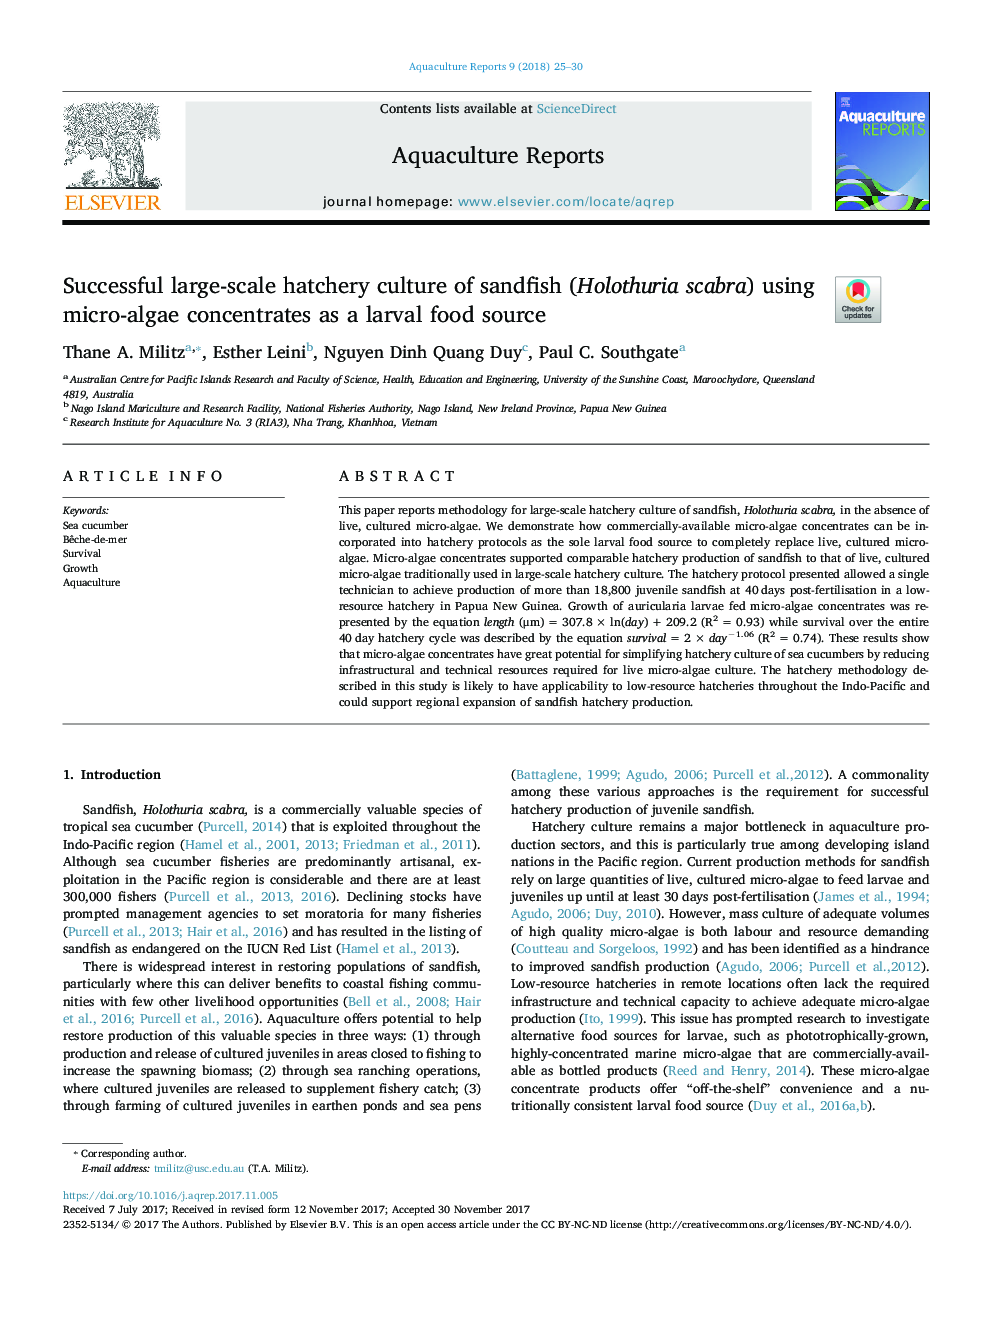 Successful large-scale hatchery culture of sandfish (Holothuria scabra) using micro-algae concentrates as a larval food source